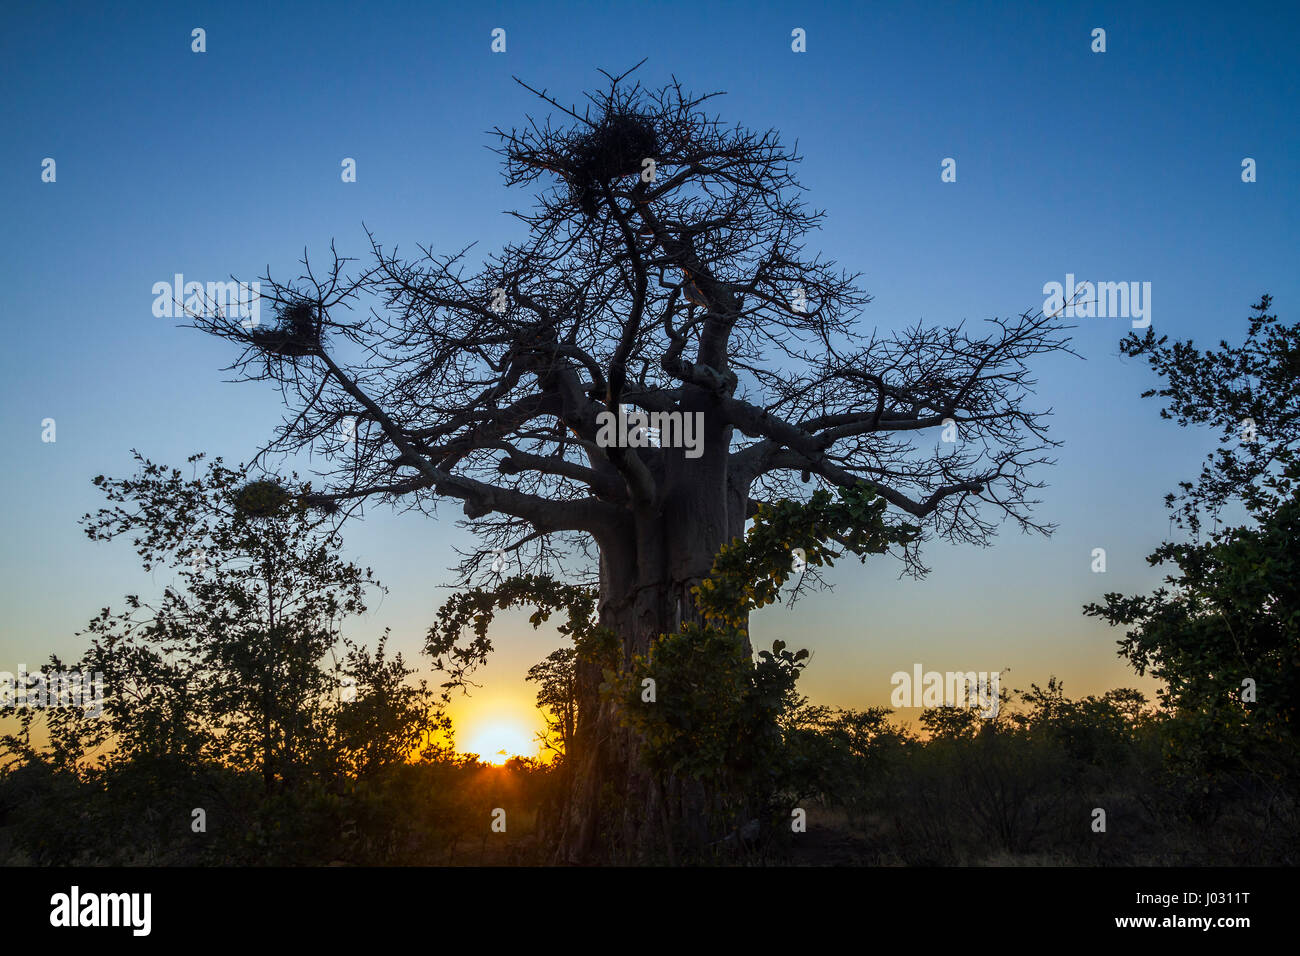 Baobab tree in Kruger national park, South Africa ; Specie Adansonia digitata family of Malvaceae Stock Photo